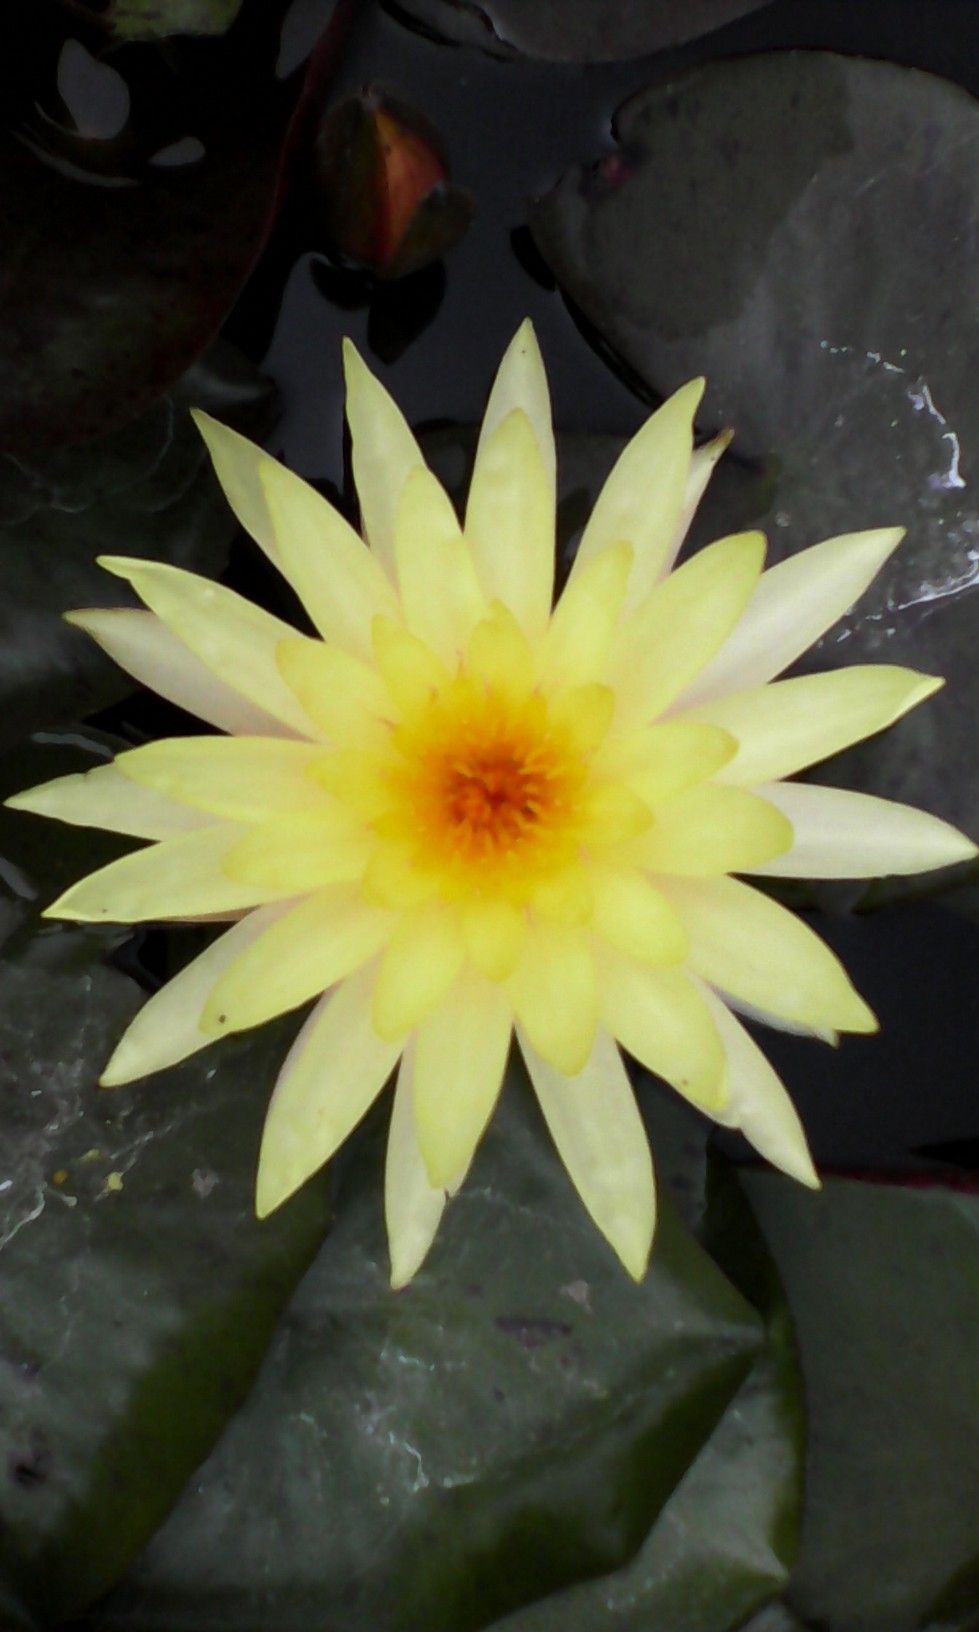 A close up of a yellow flower with a red center